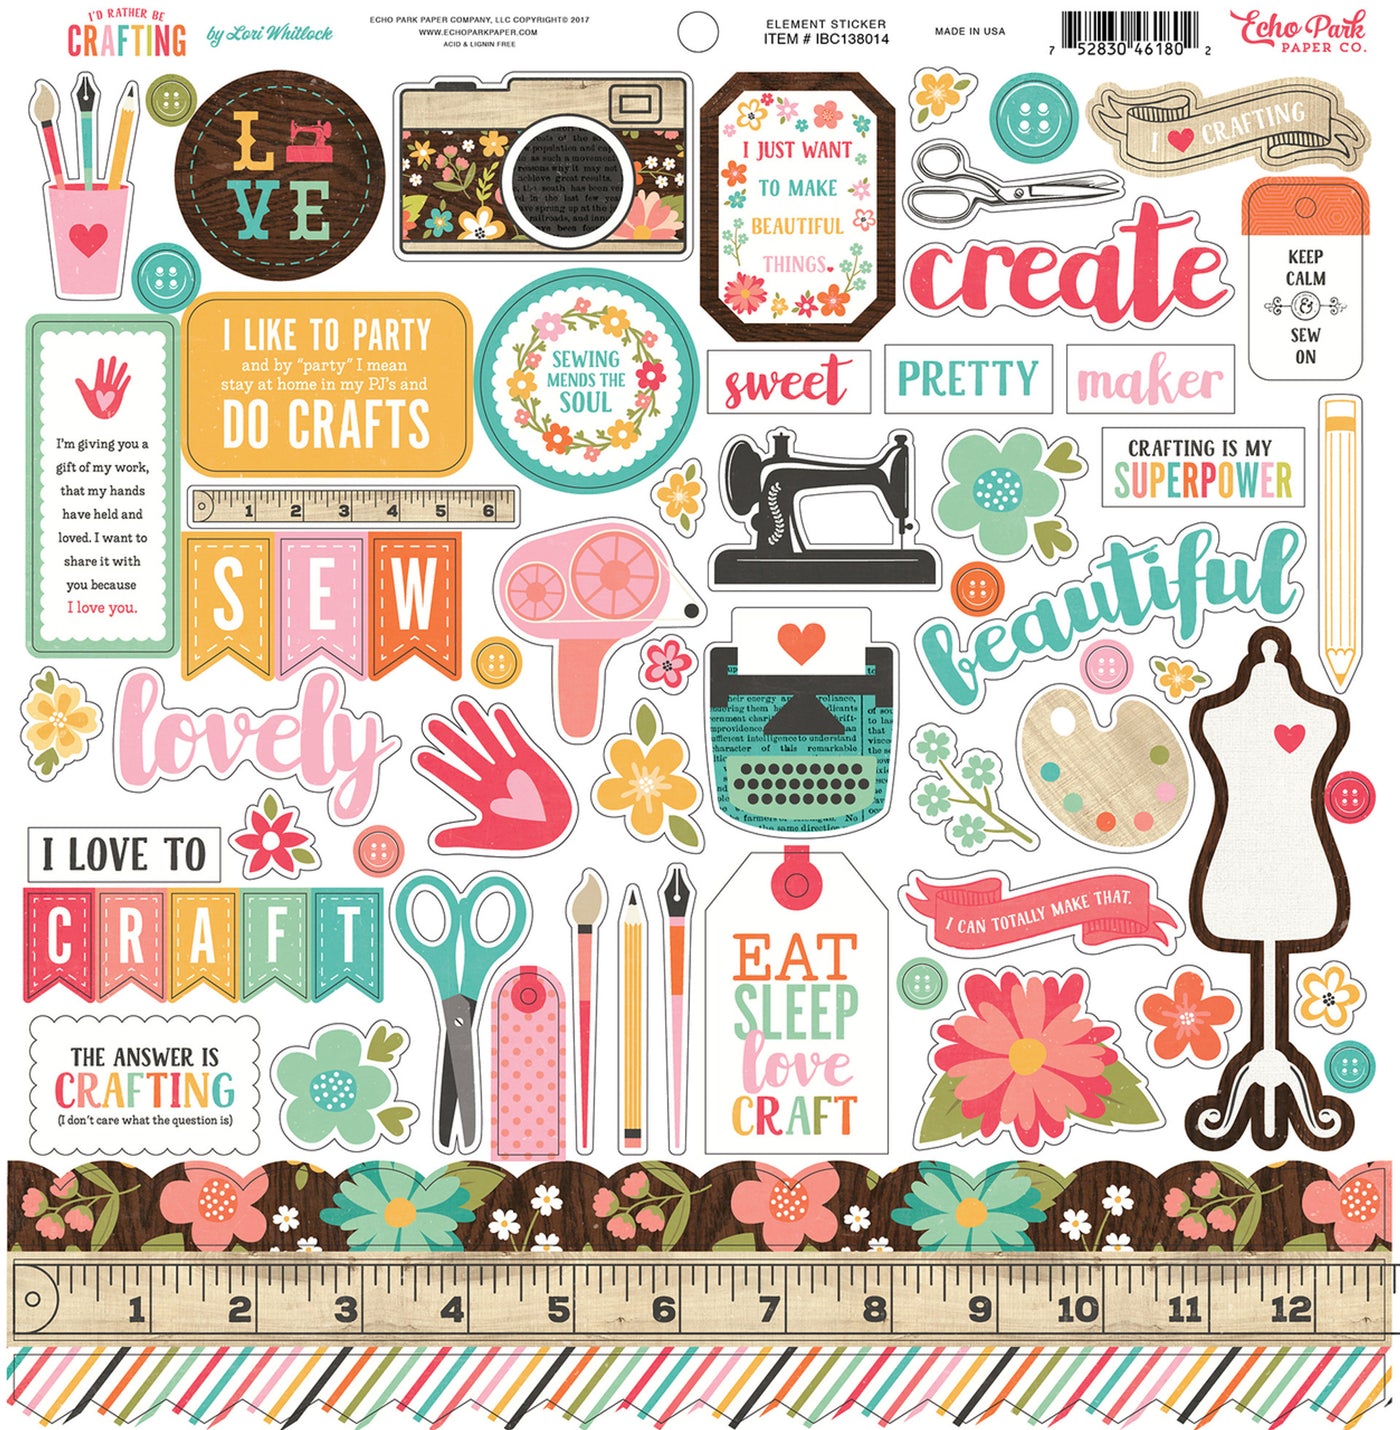 I'd Rather Be Crafting Elements 12" x 12" Cardstock Stickers from the I'd Rather Be Crafting&nbsp; Collection by Echo Park. These stickers include sewing items, a camera, crafting items, flowers, phrases, borders, and more!